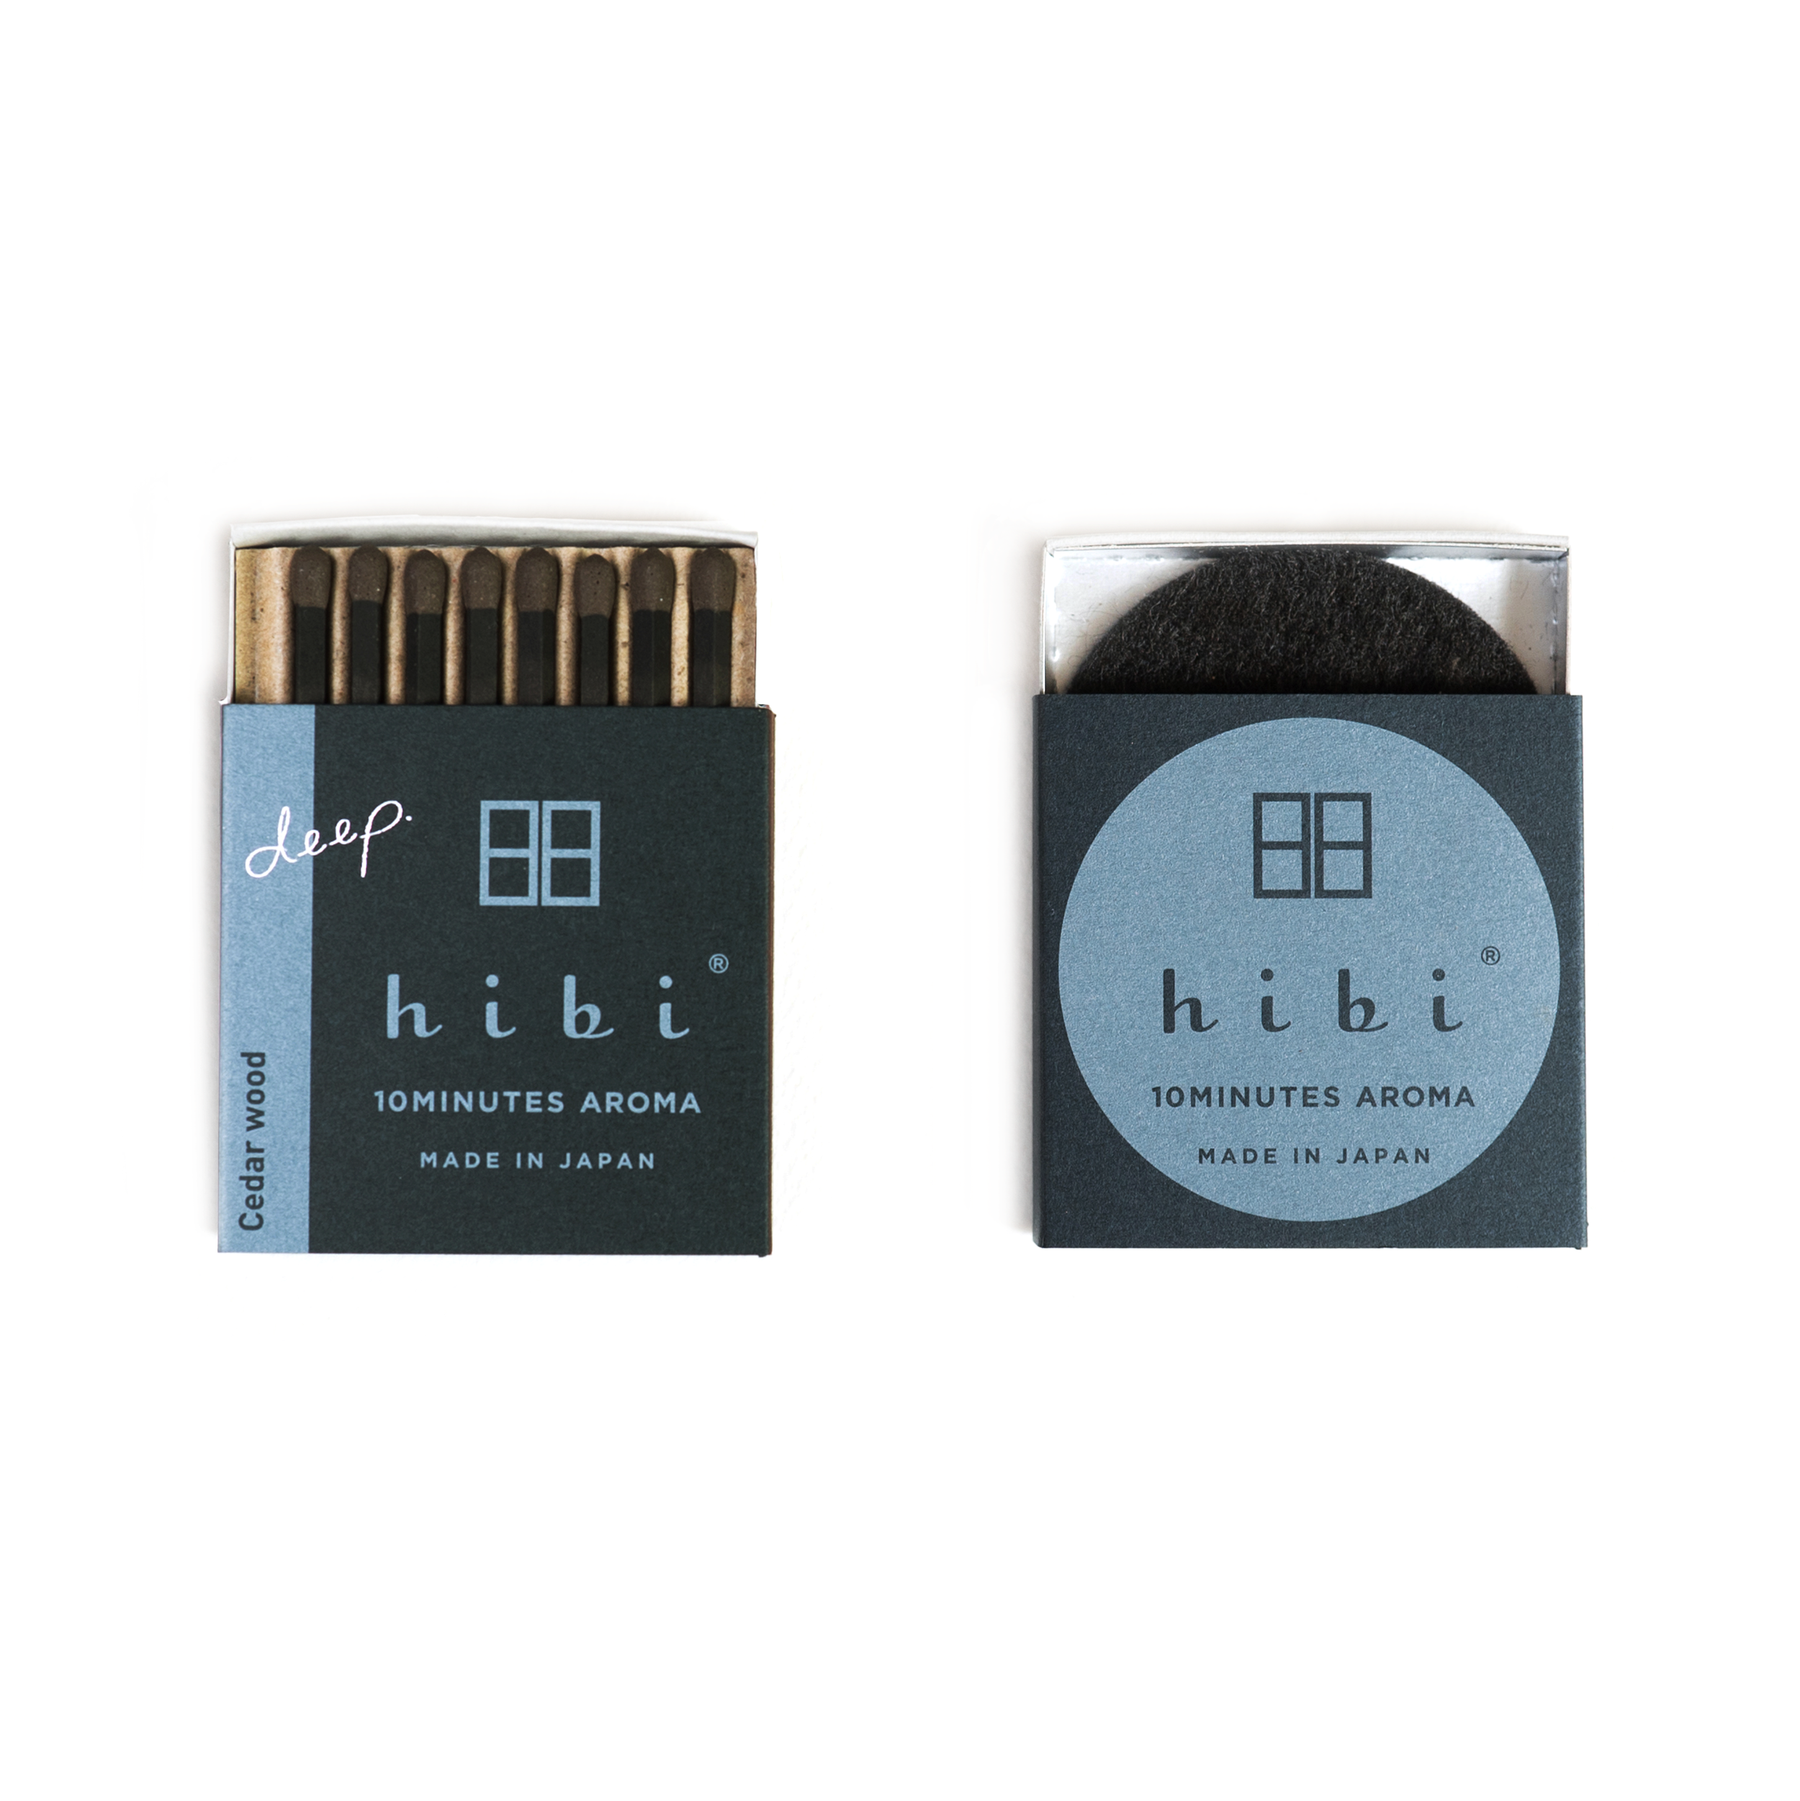 AMEICO - Official US Distributor of Hibi Match - Box of 8 Incense Matches